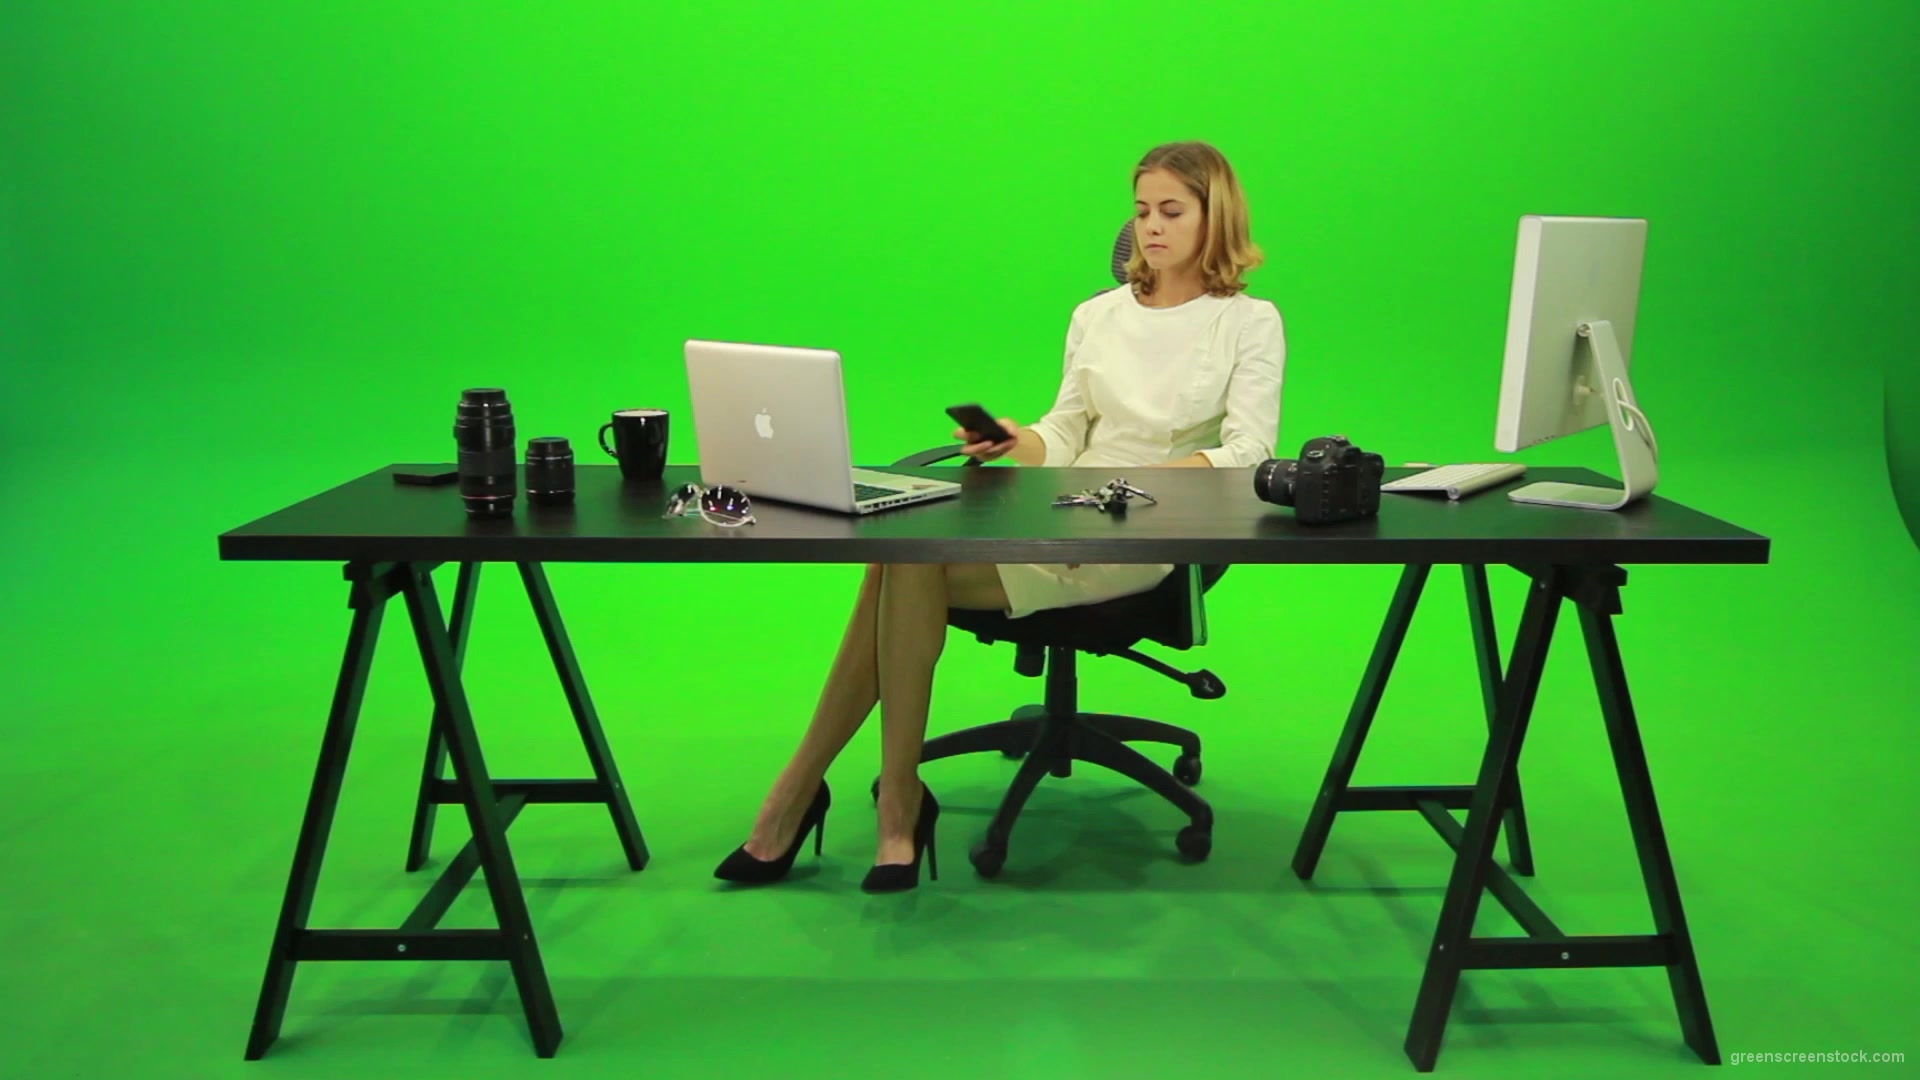 Angry-Business-Woman-Talking-on-the-Phone-Green-Screen-Footage_001 Green Screen Stock